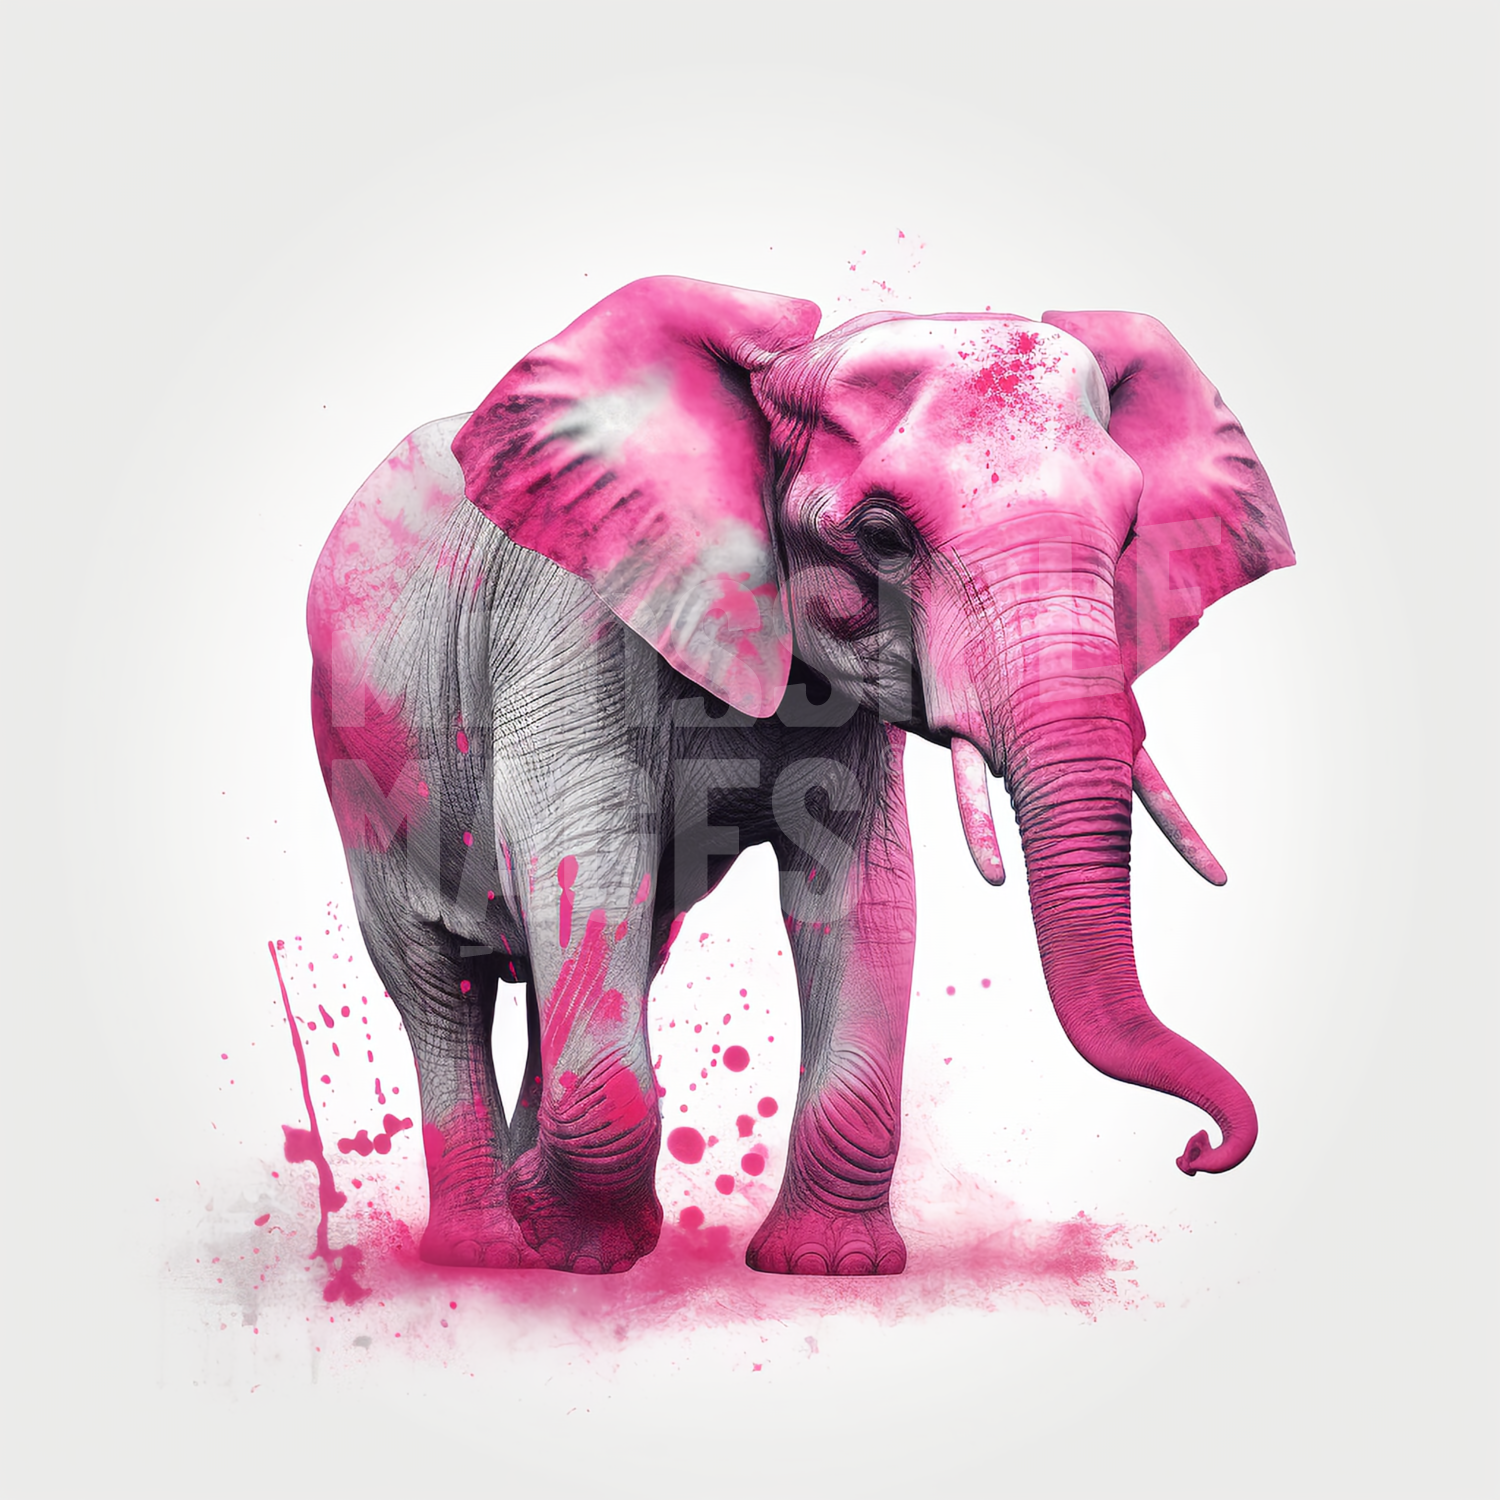 A pink elephant standing in front of a white background